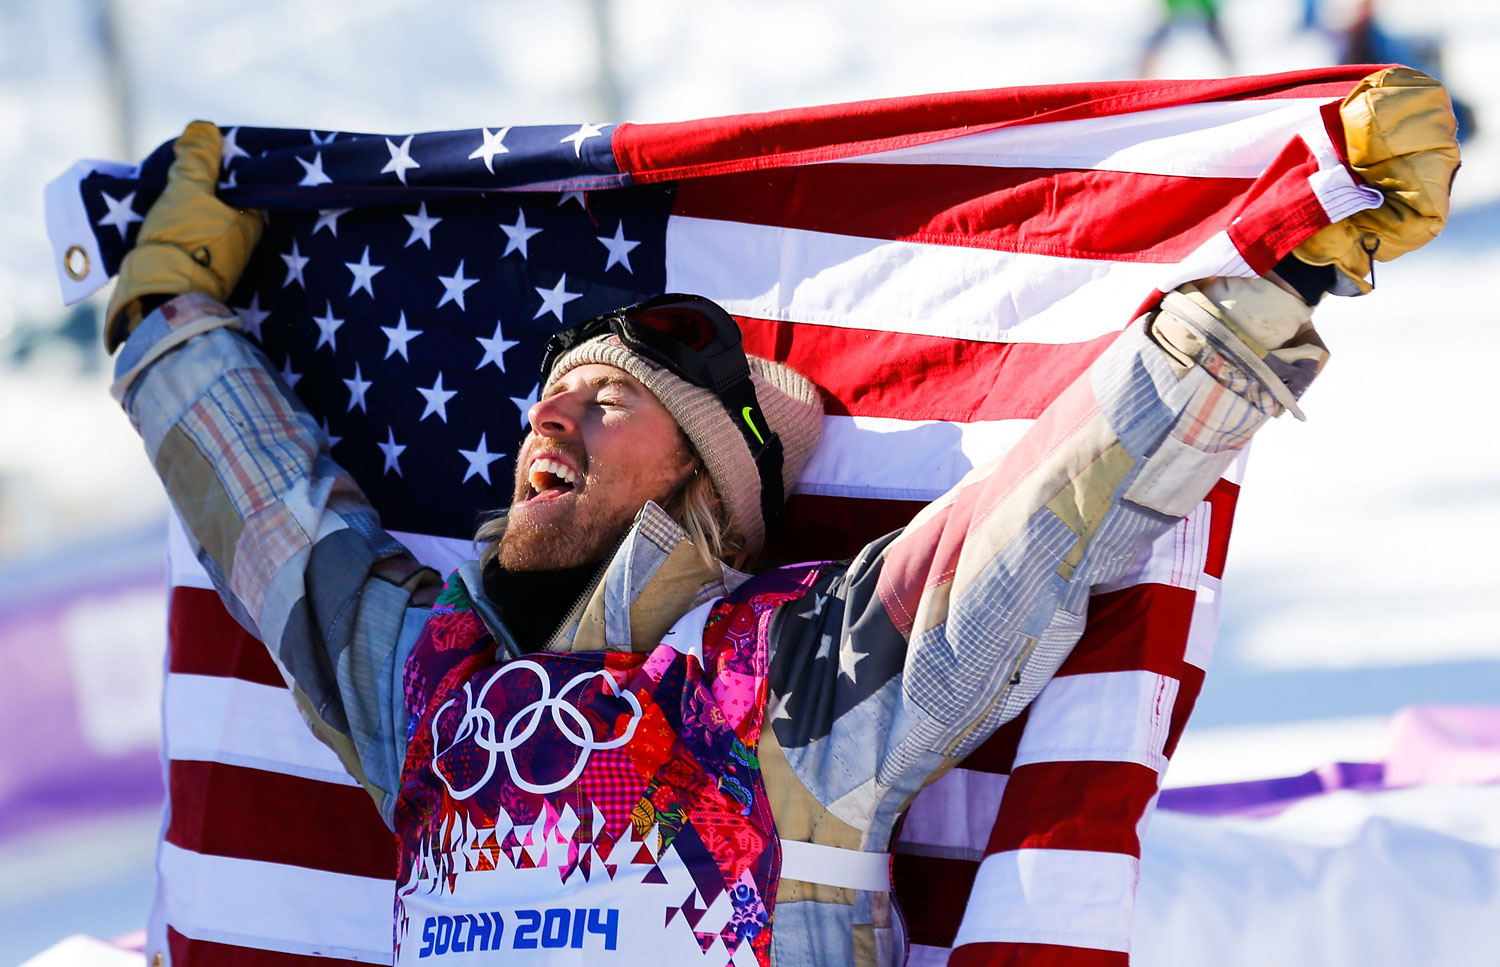 Winner Kotsenburg of the U.S. celebrates after the men's snowboard slopestyle final competition at the 2014 Sochi Olympic Games in Rosa Khutor